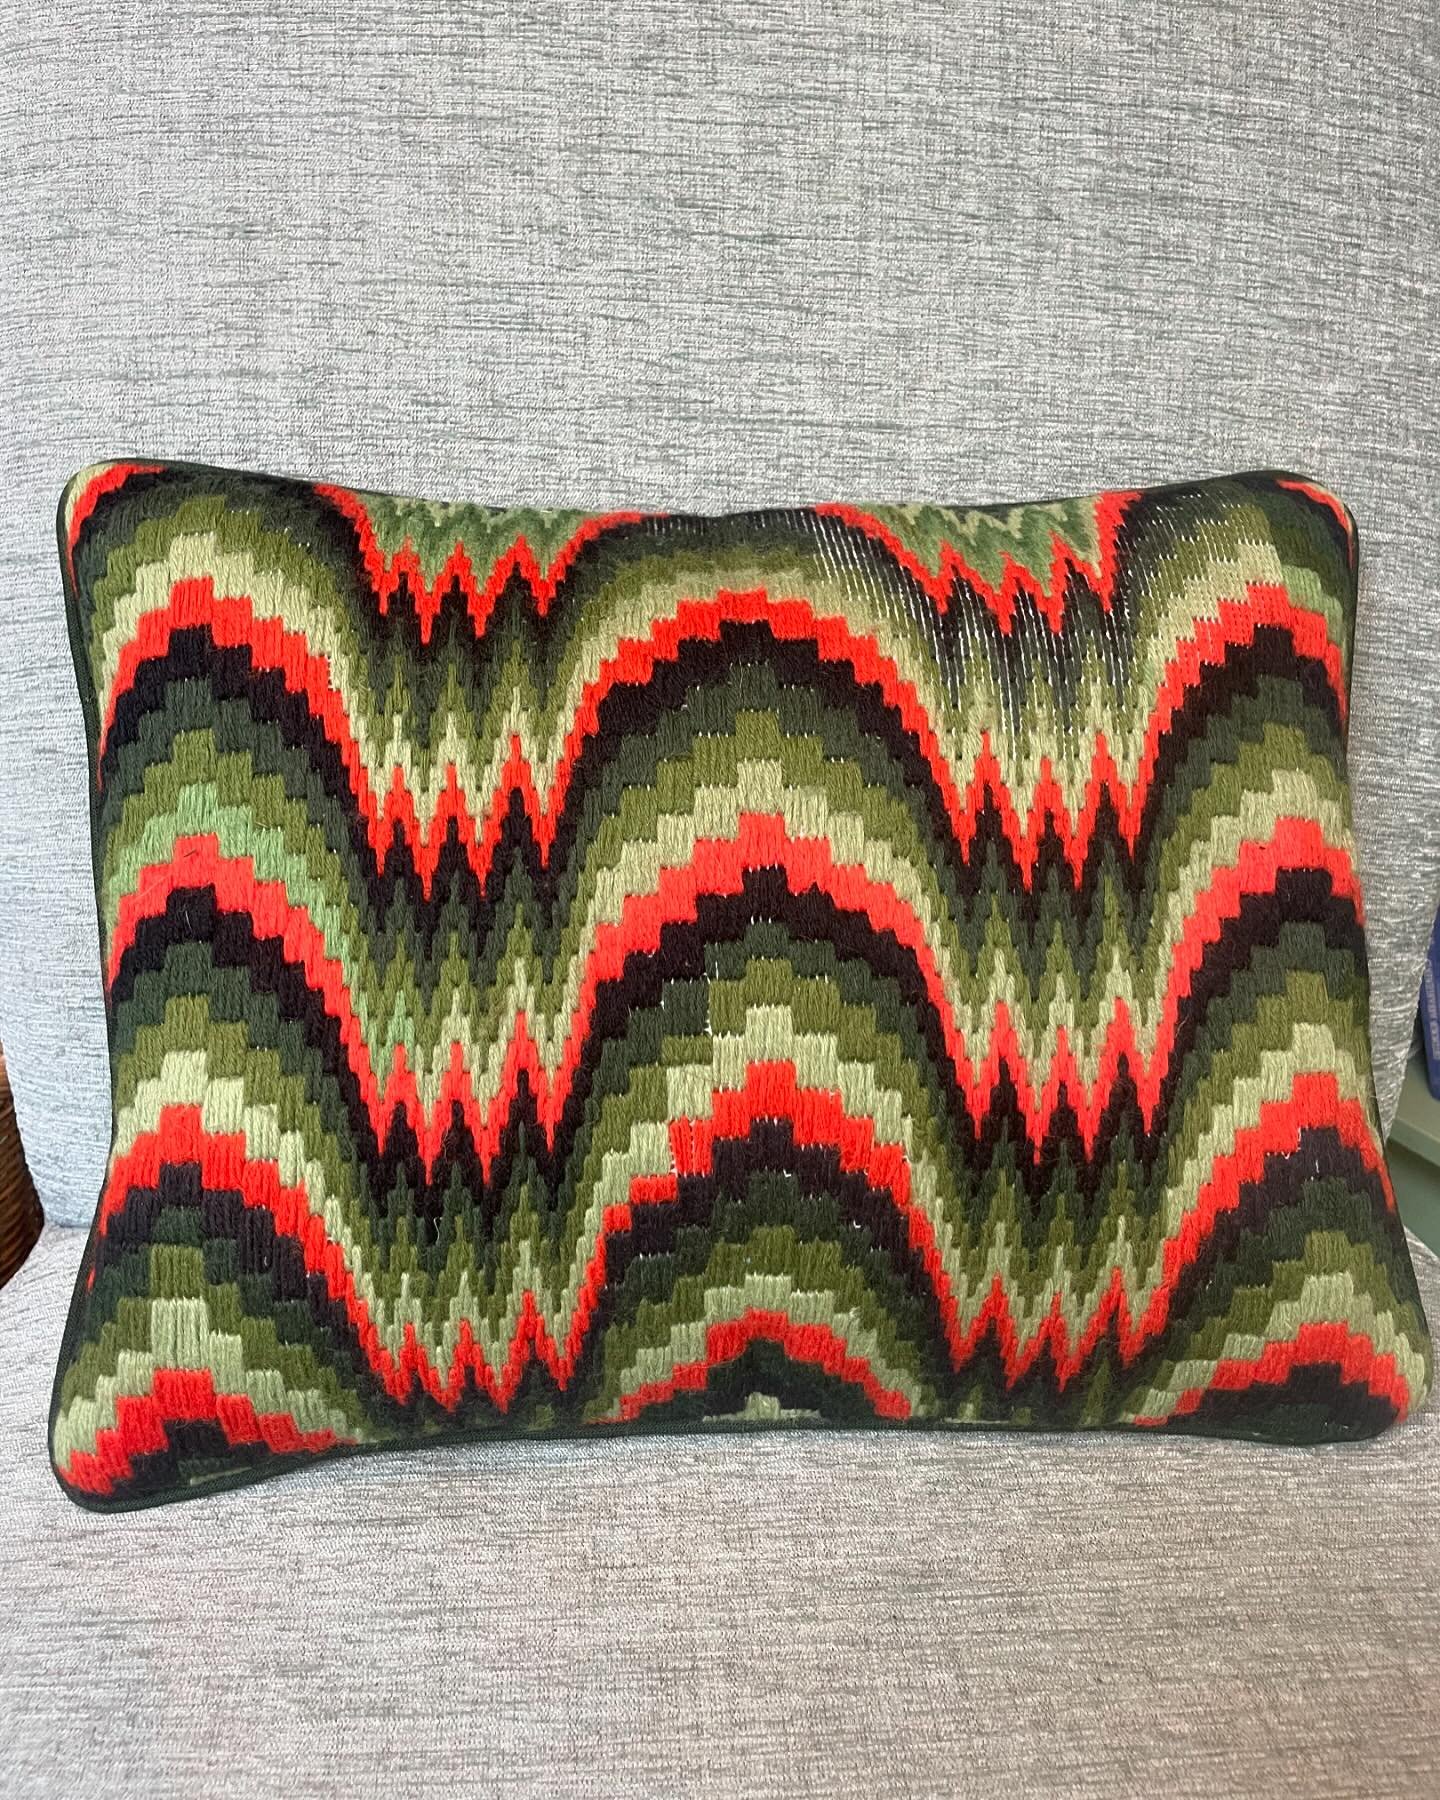 I call myself a writer but am feeling very chuffed by my first excursion into #bargello thank you to @oneoffneedlework for turning my efforts into this glorious plumpness